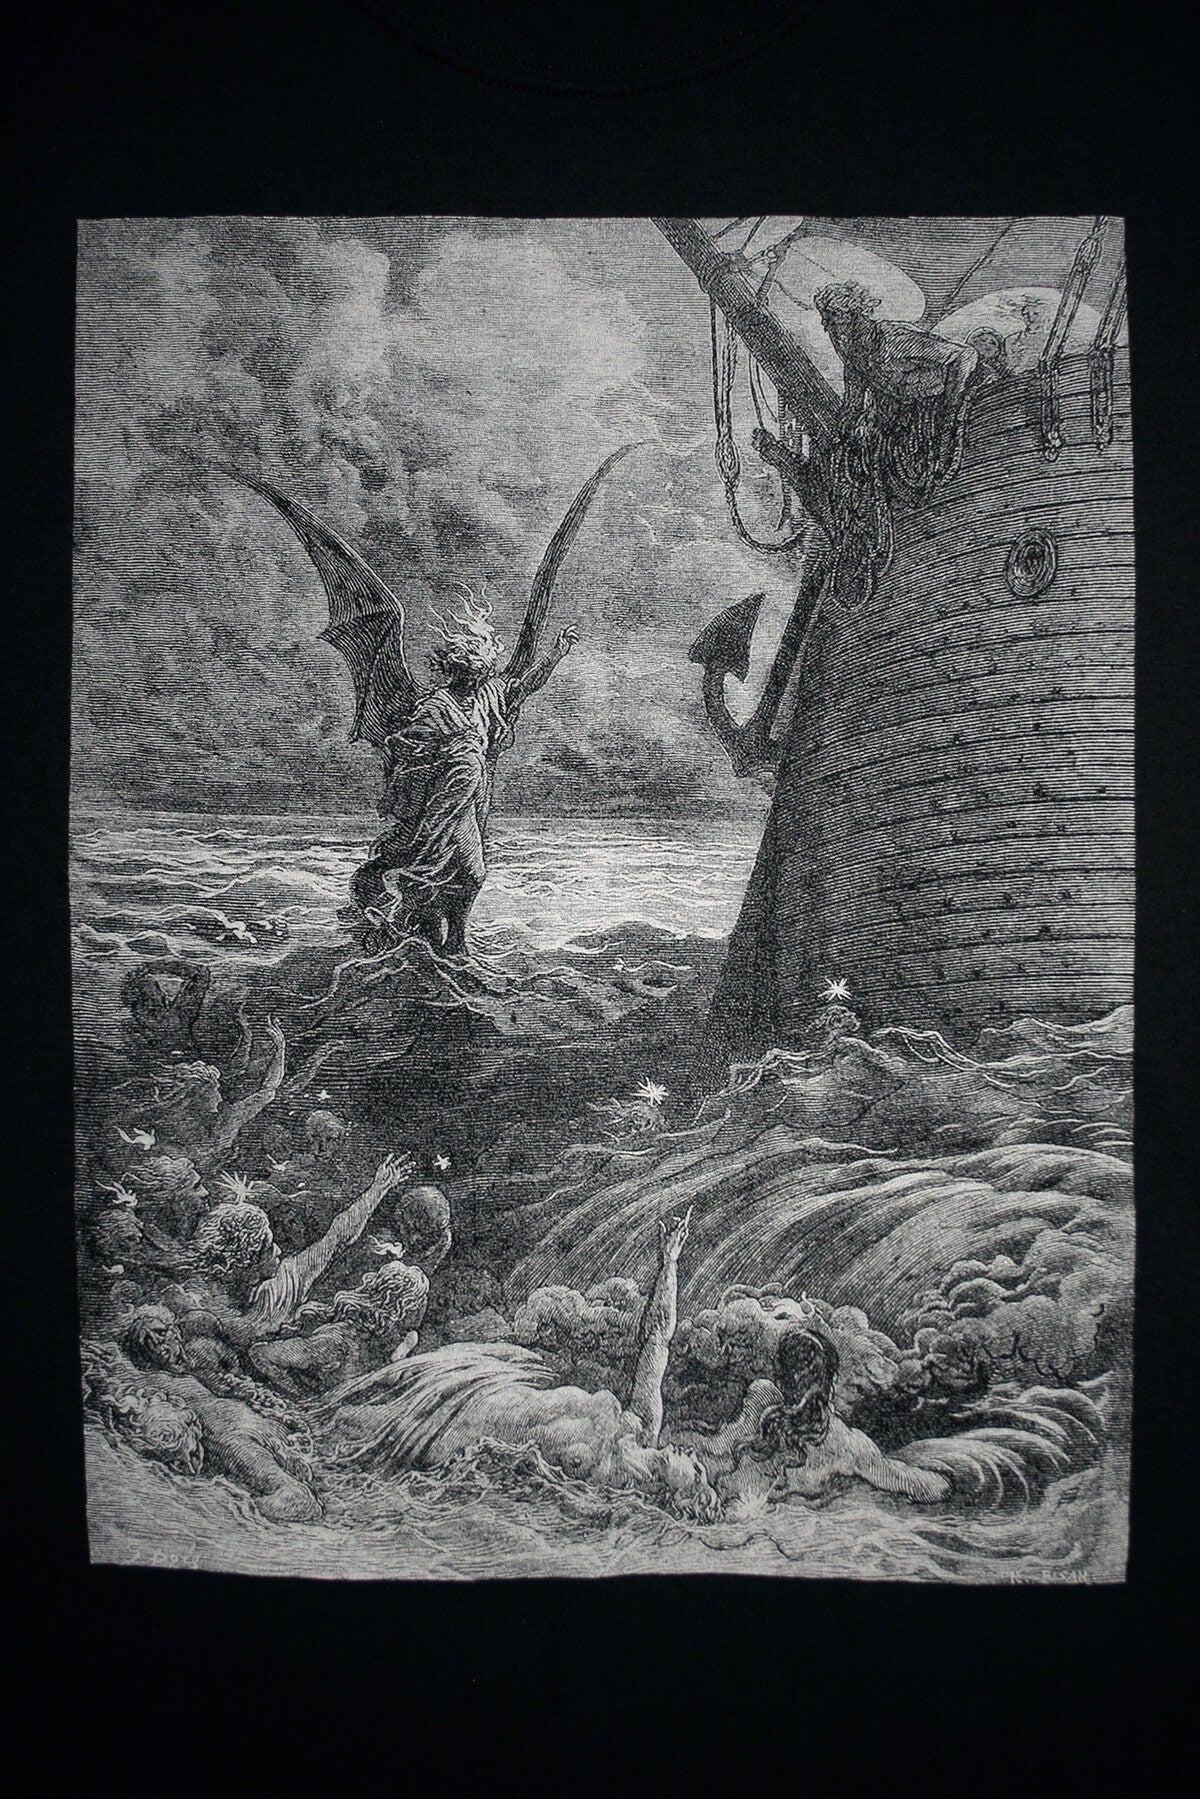 The Death-Fires Danced at Night, Rime of the ancient marine, illustration by Gustave Doré - T-shirt female fitted